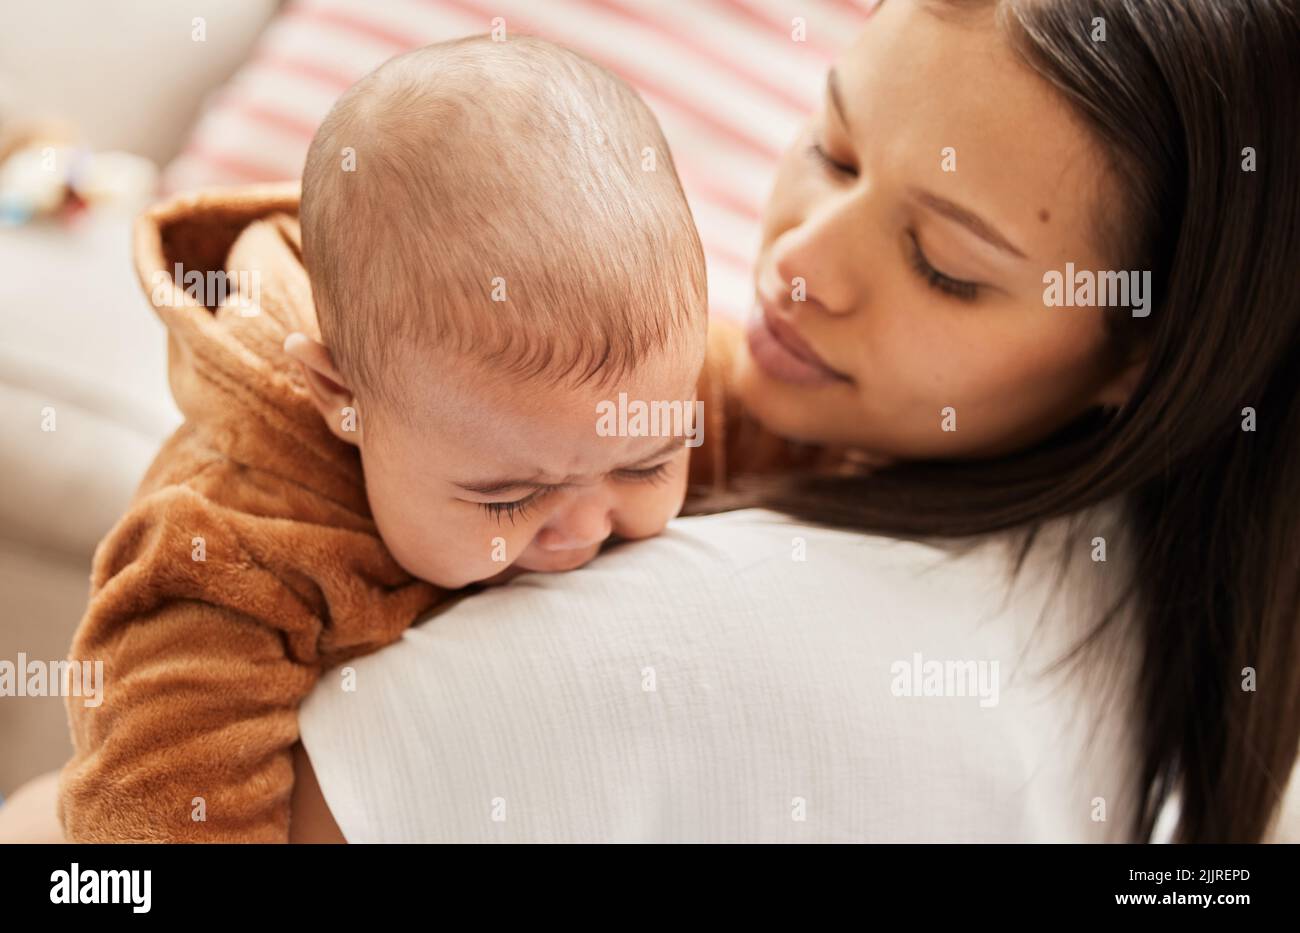 What happened my little one. a young mother consoling her crying baby. Stock Photo